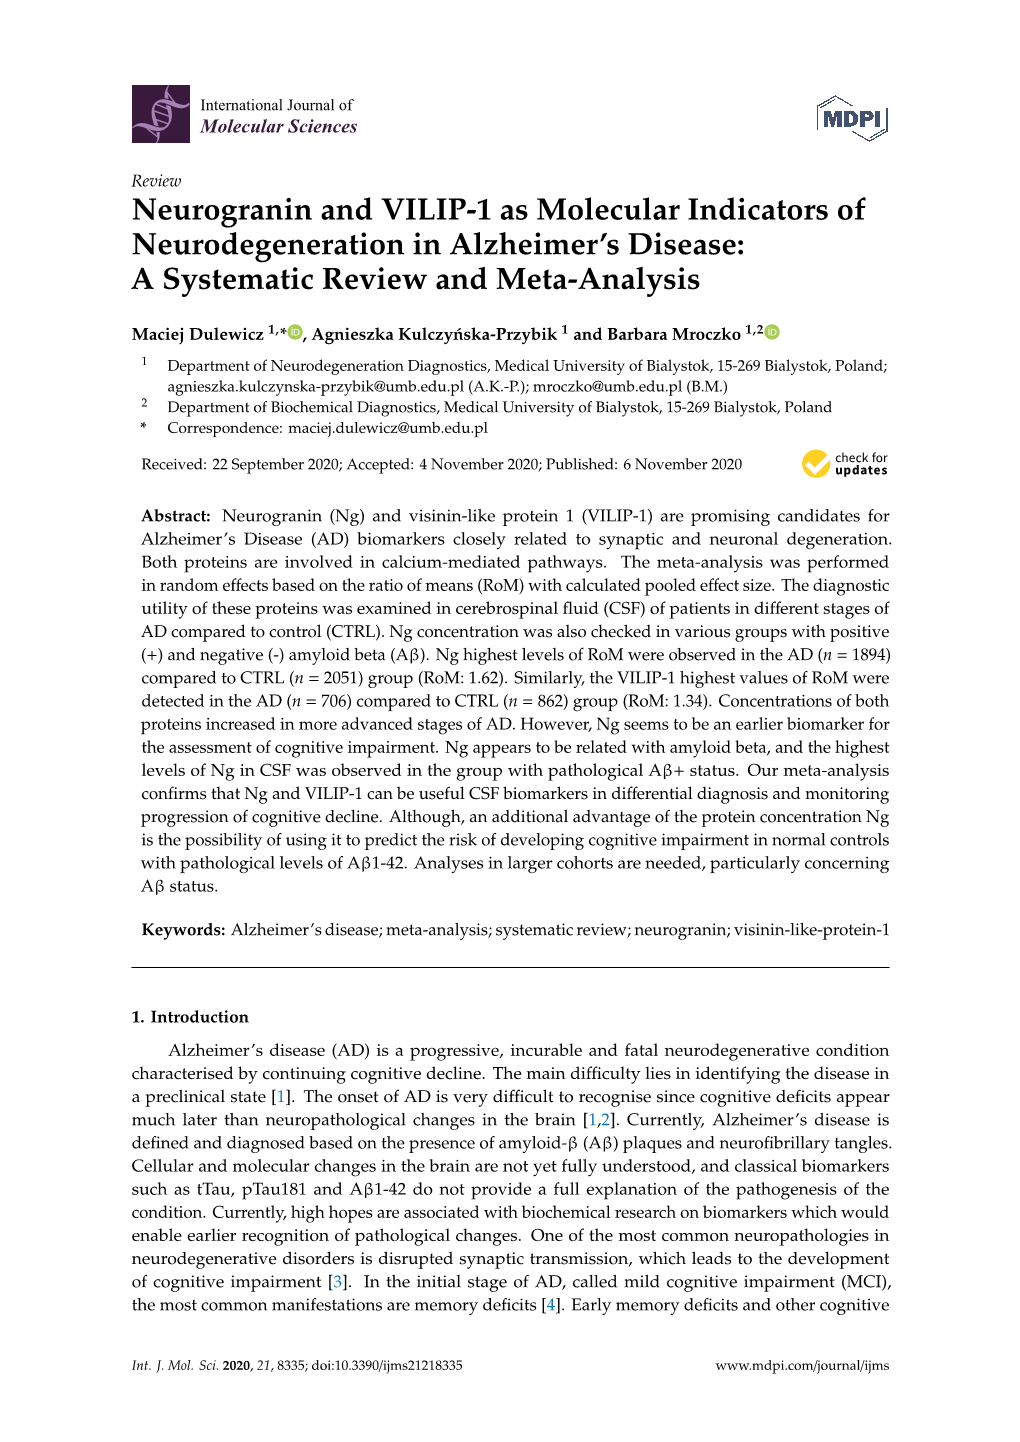 Neurogranin and VILIP-1 As Molecular Indicators of Neurodegeneration in Alzheimer’S Disease: a Systematic Review and Meta-Analysis